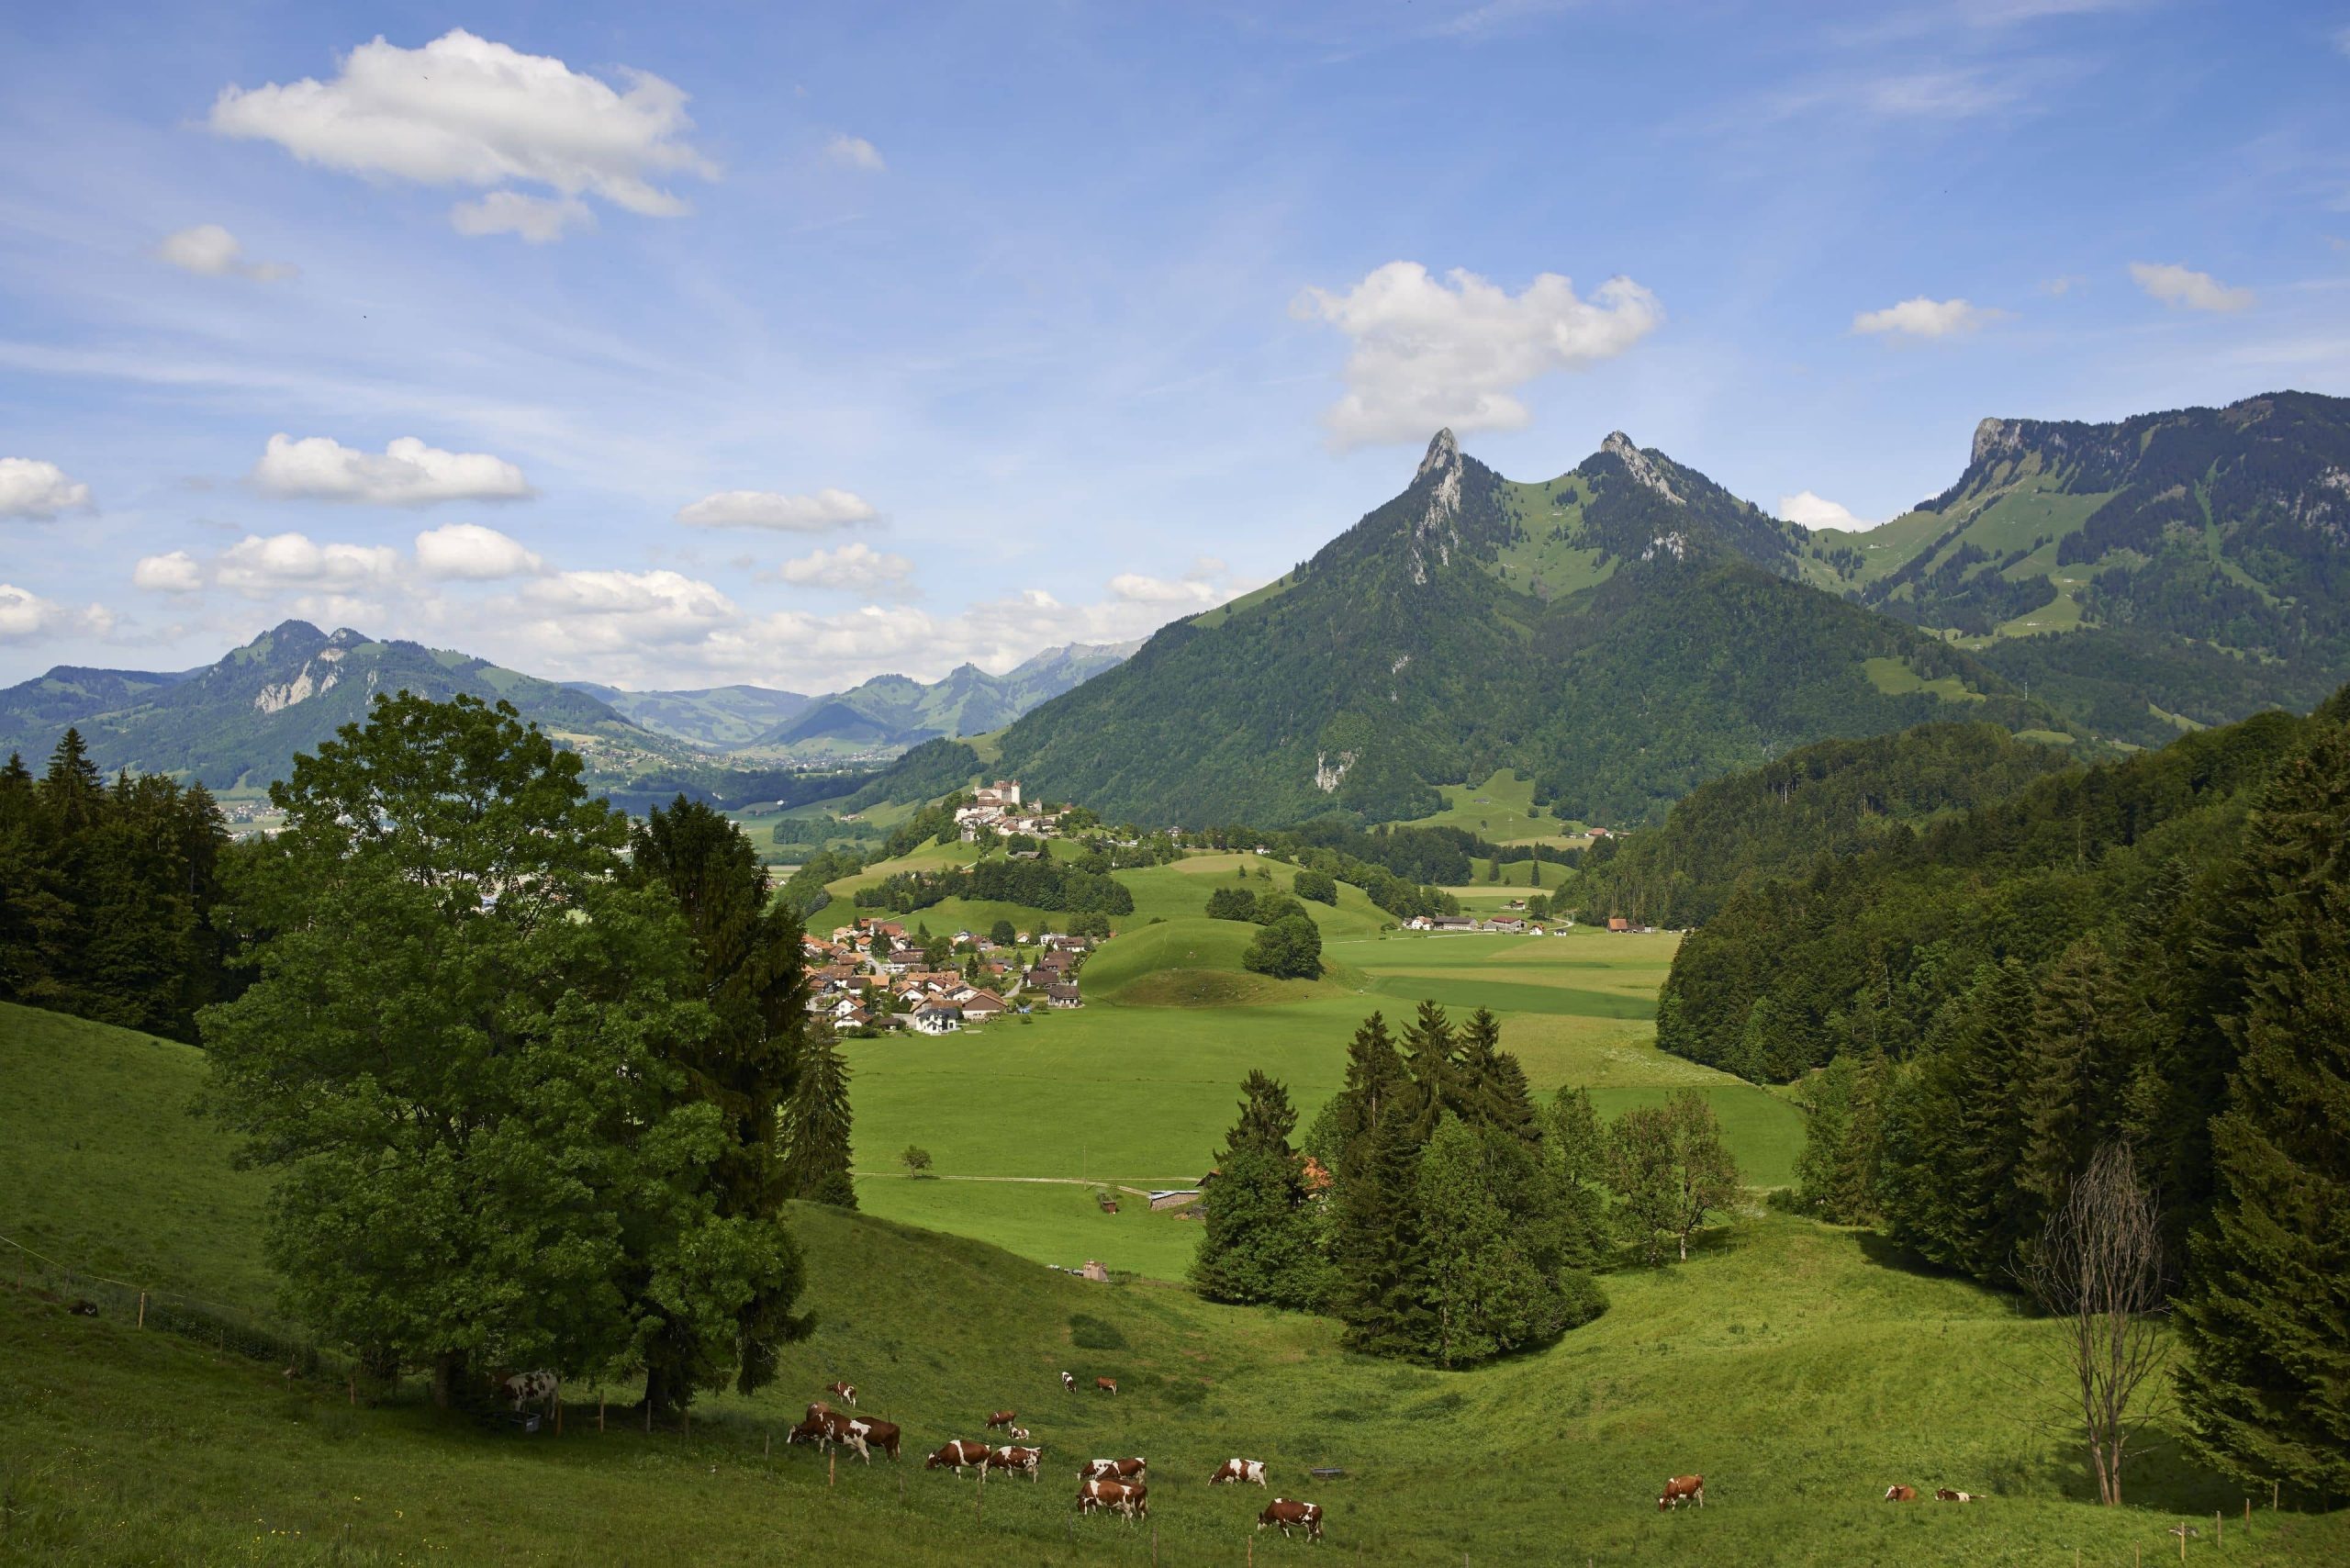 Cows in a field in Switzerland with mountains and a little village in the background